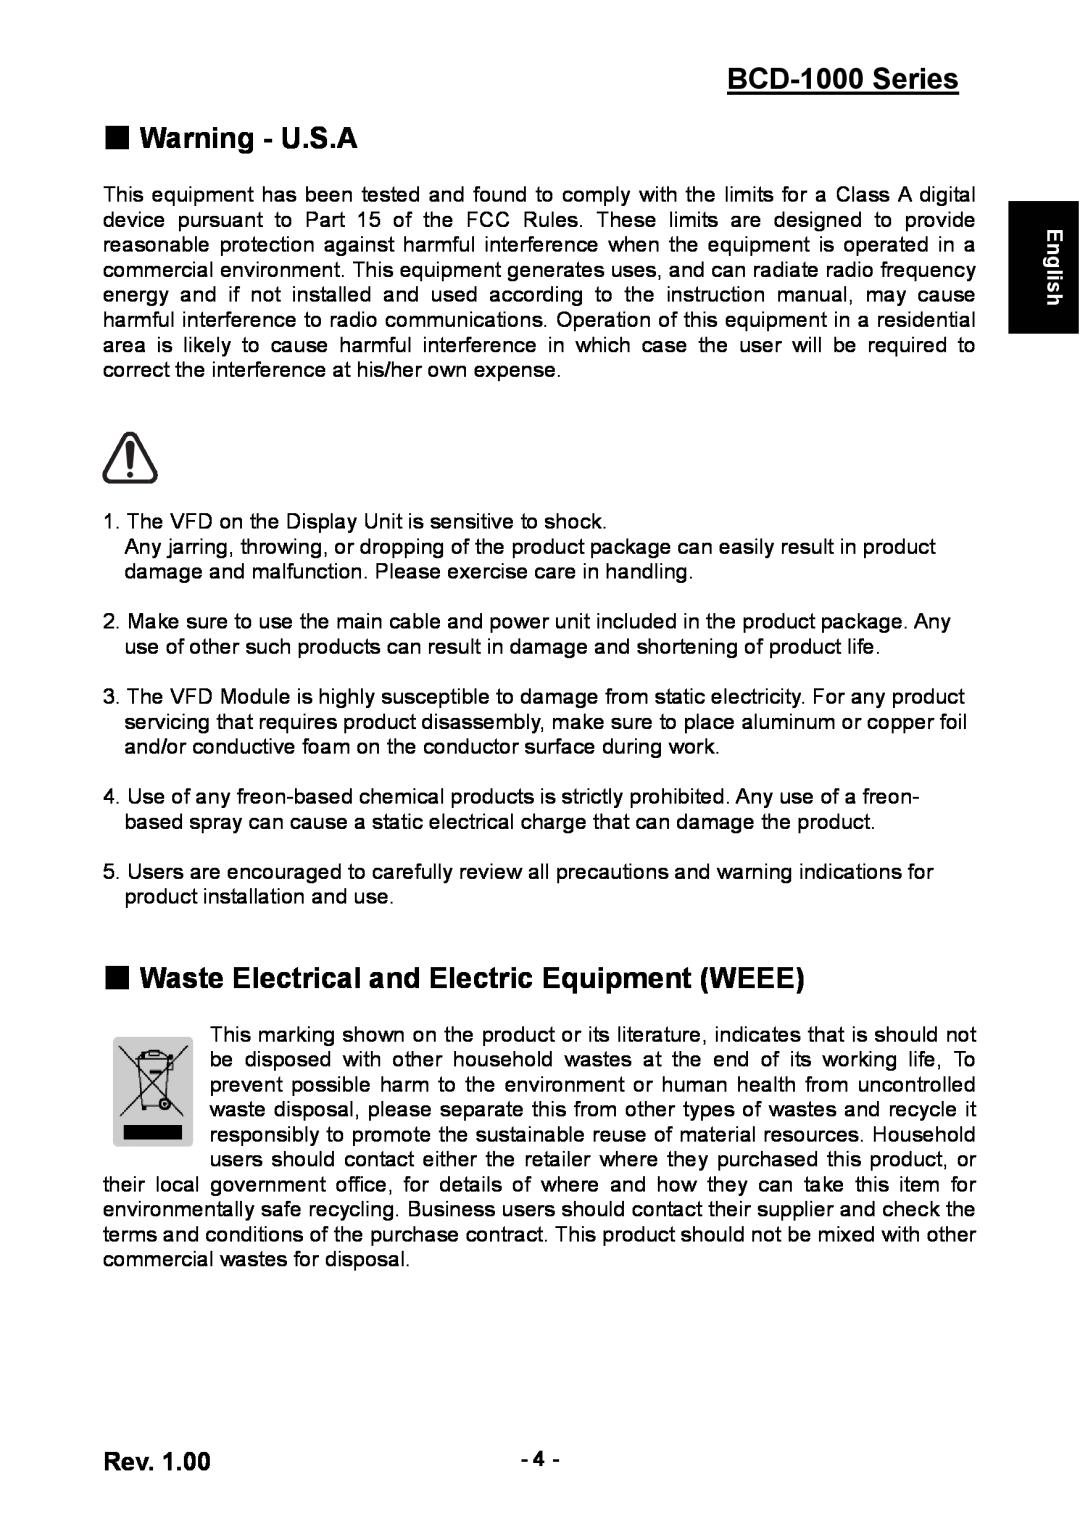 Samsung user manual BCD-1000 Series Warning - U.S.A, Waste Electrical and Electric Equipment WEEE, English 